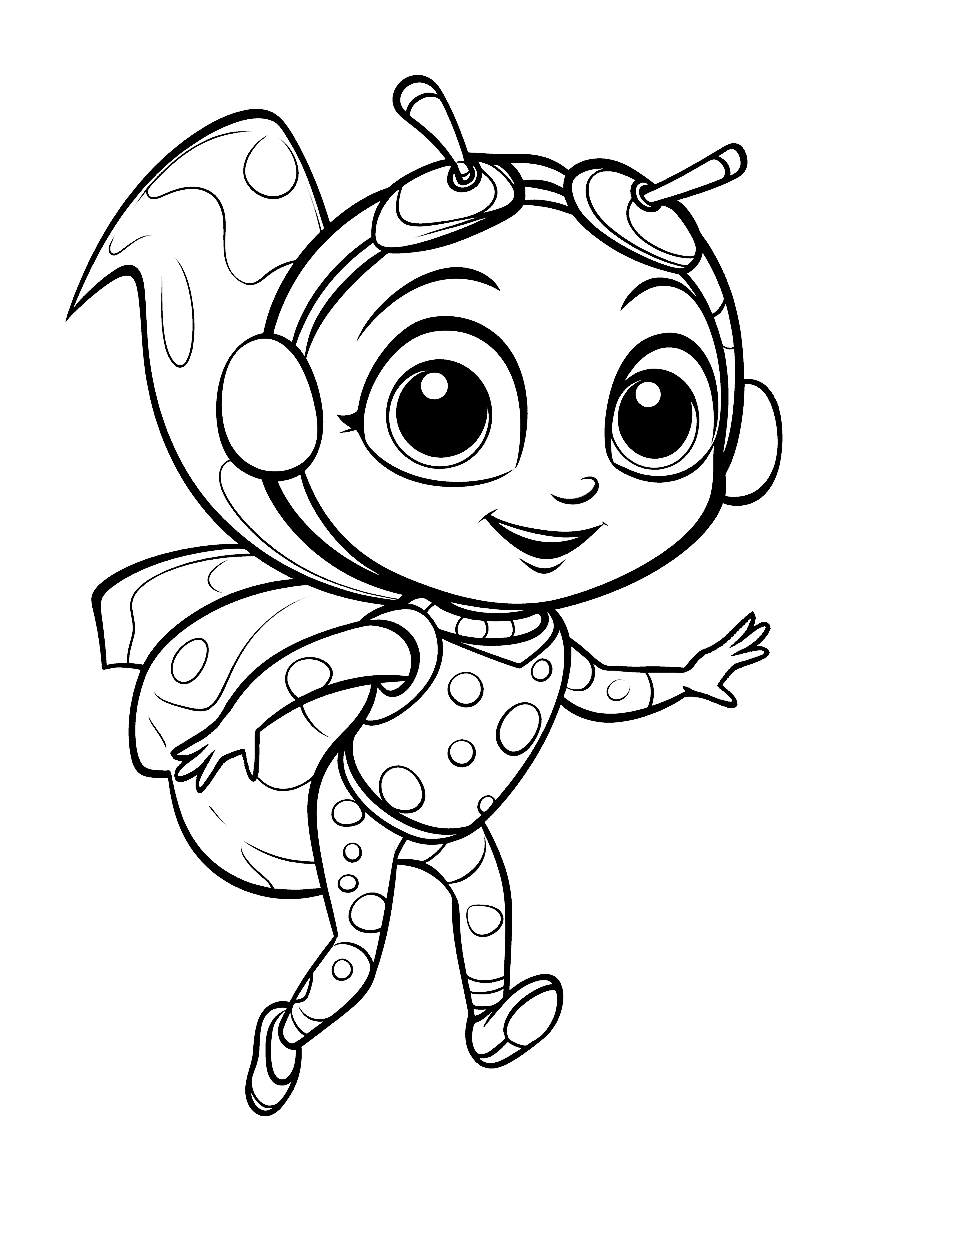 Super Ladybug Coloring Page - A super ladybug dressed in a superhero costume and everything ready to save the day.